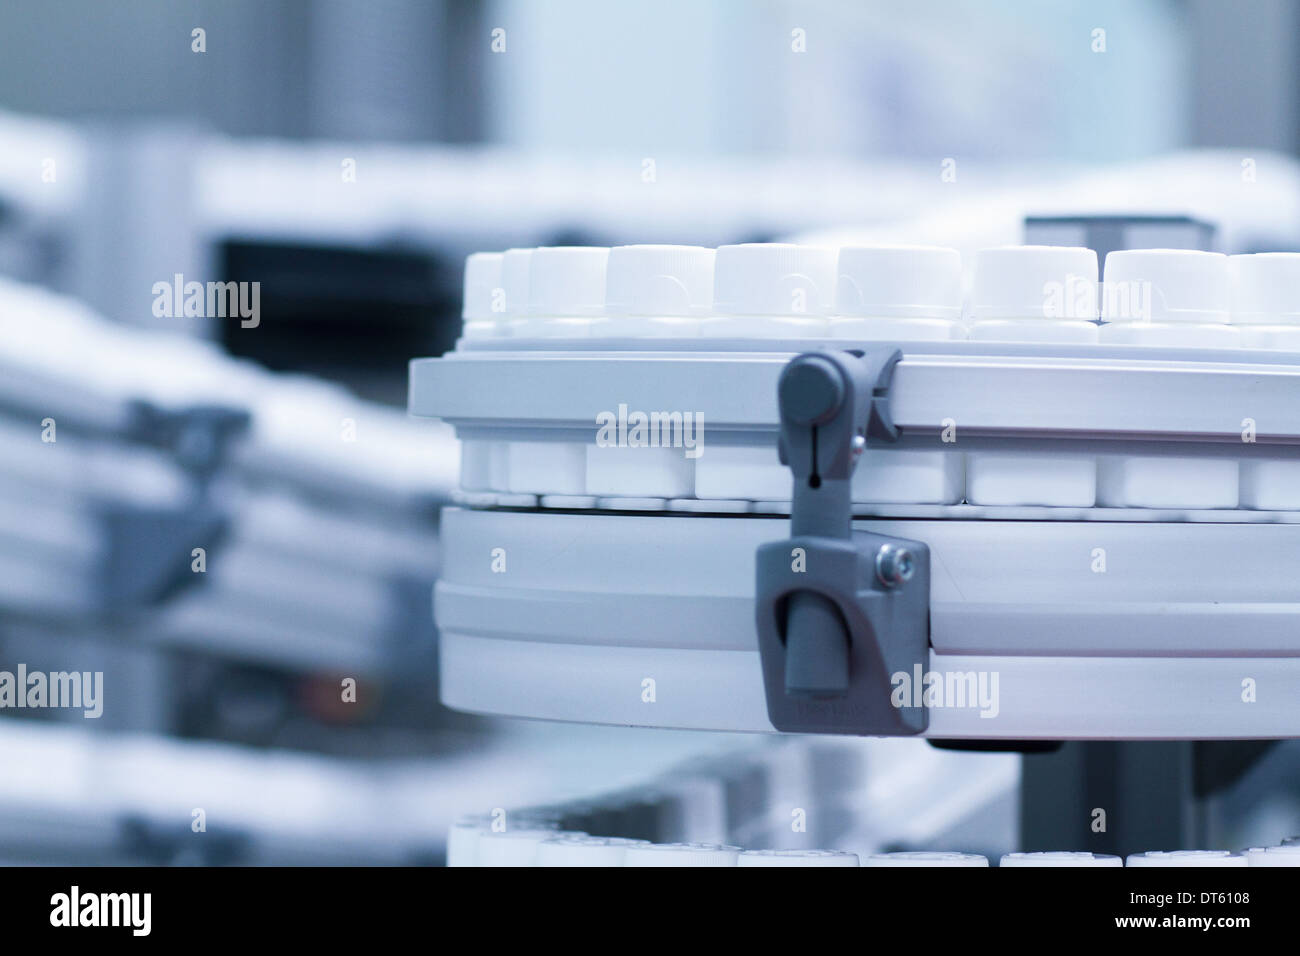 Close up of carousel of pharmaceutical containers Stock Photo